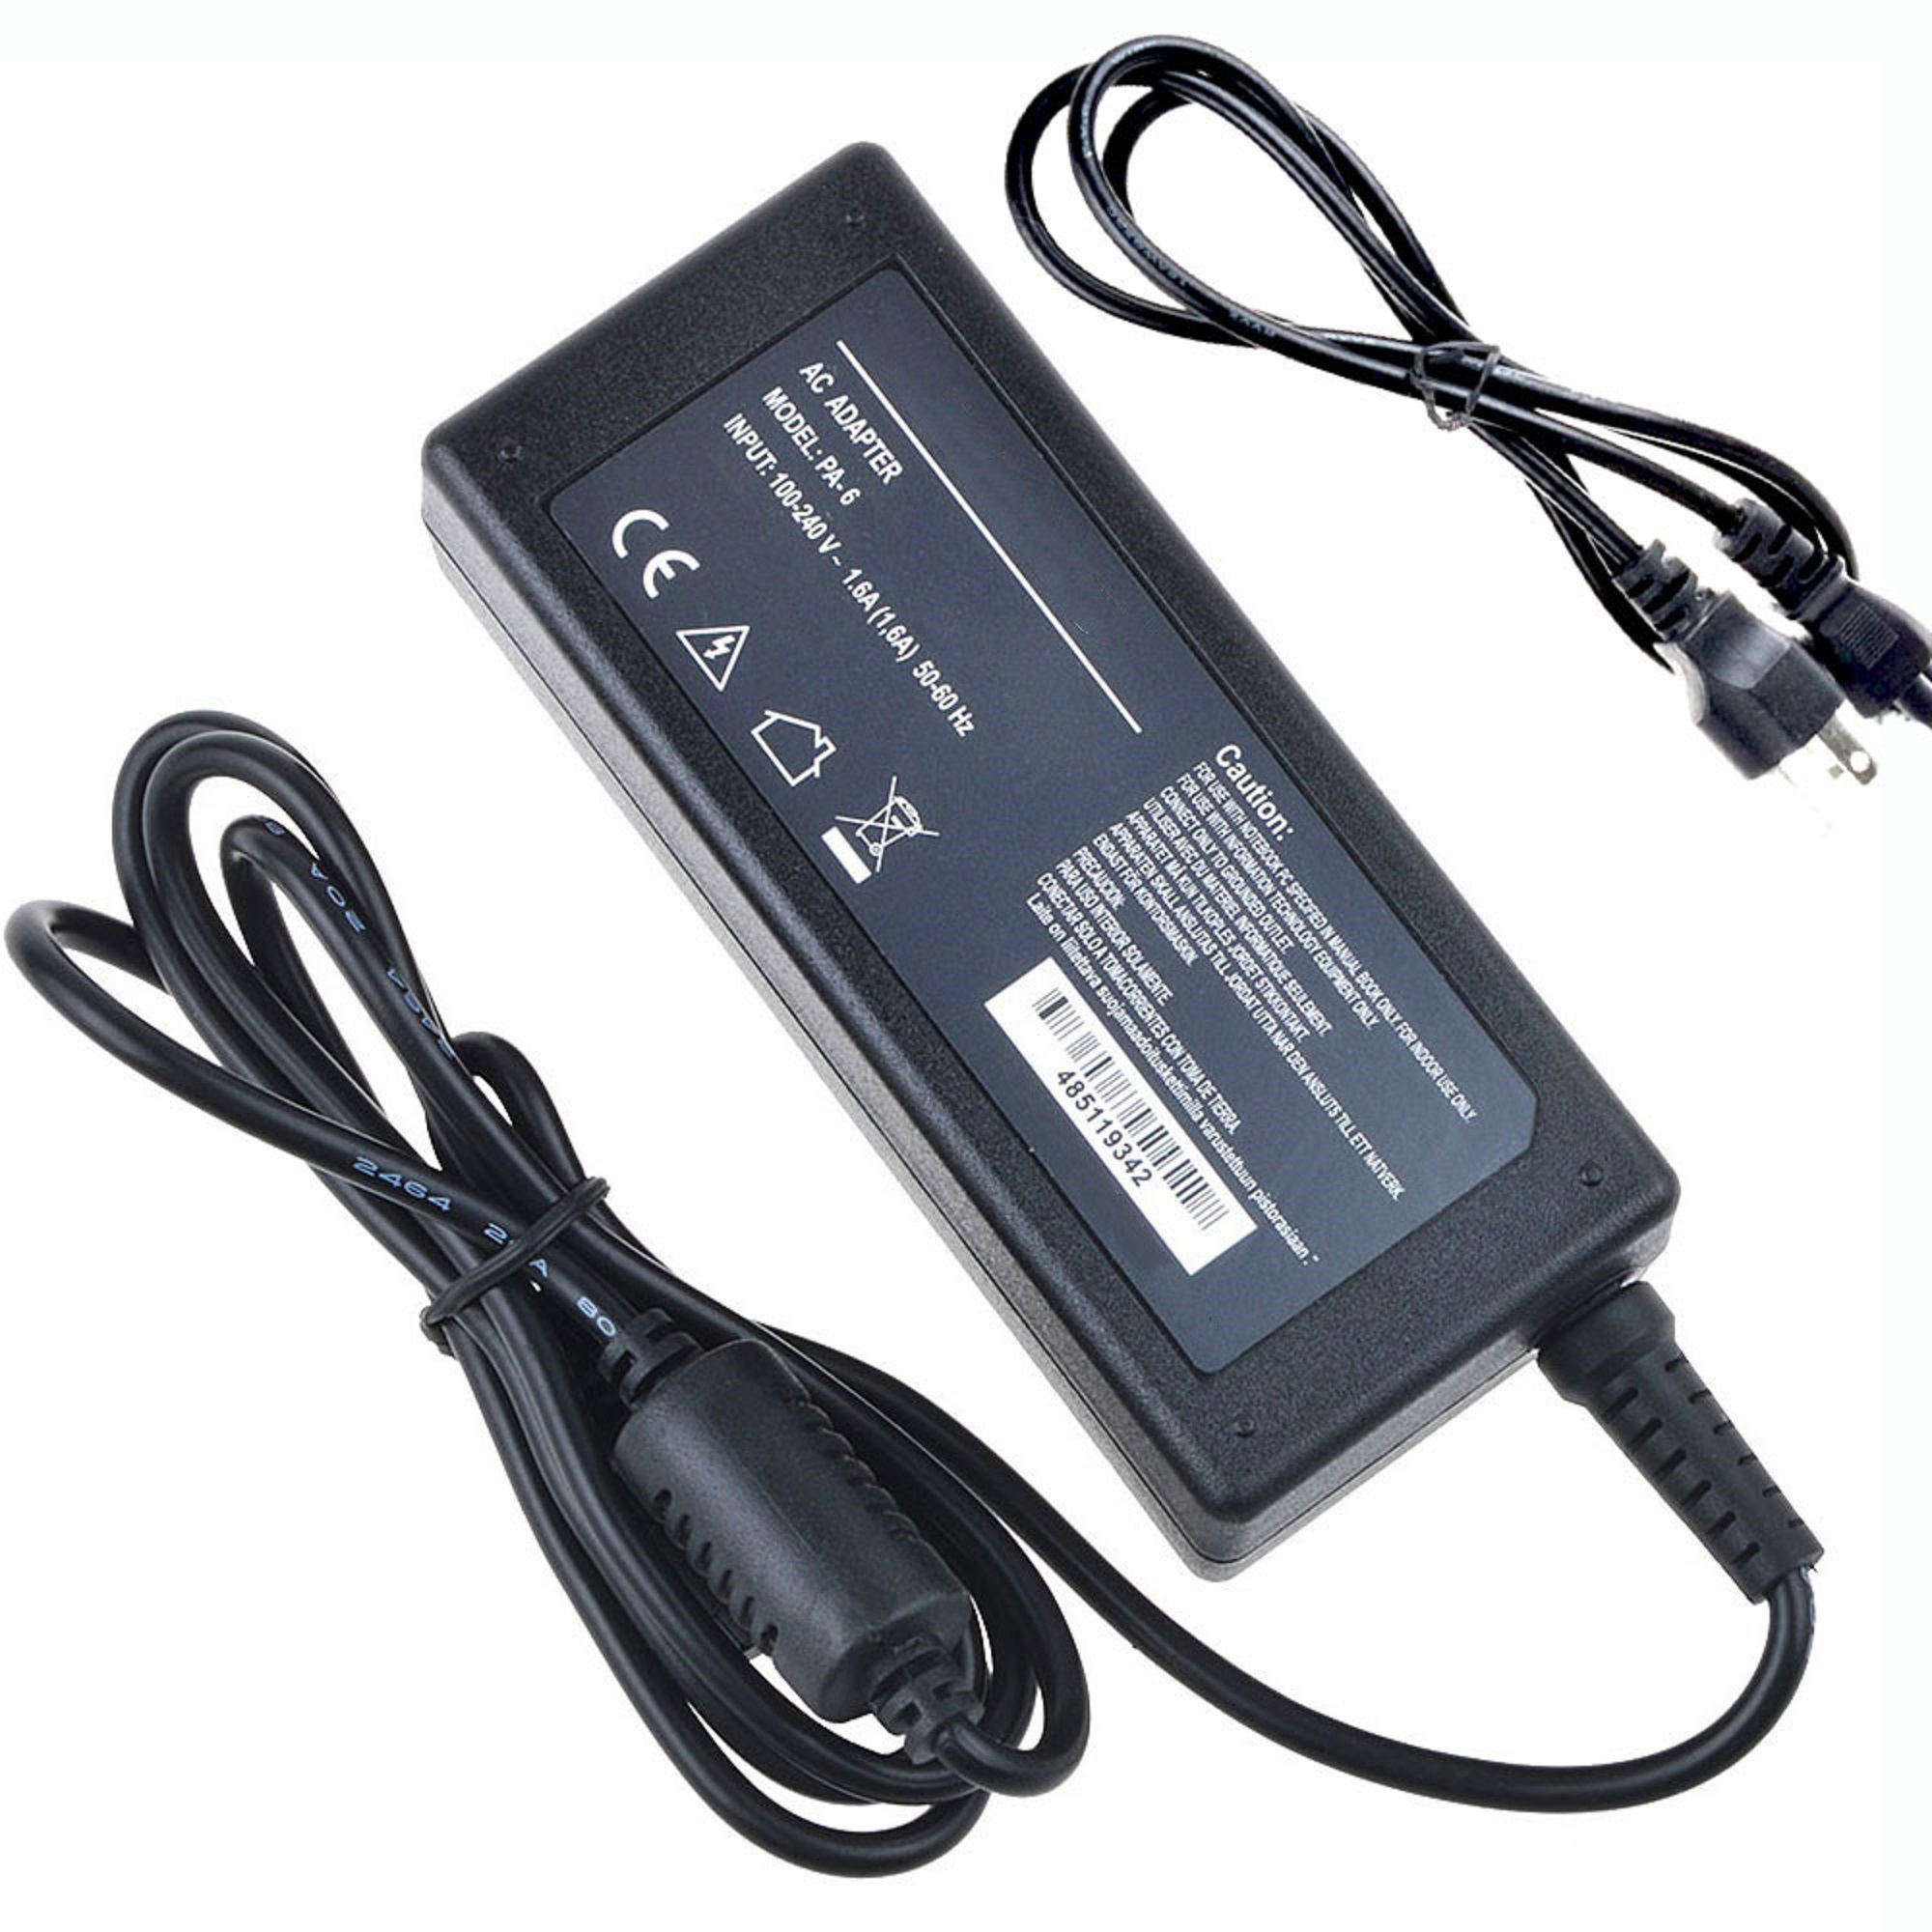 K-MAINS AC/DC Adapter Replacement for Shuttle XPC Slim DS77U Intel Kabylake Celeron 3865U Power Supply Cord Cable PS Charger Mains PSU - image 1 of 5